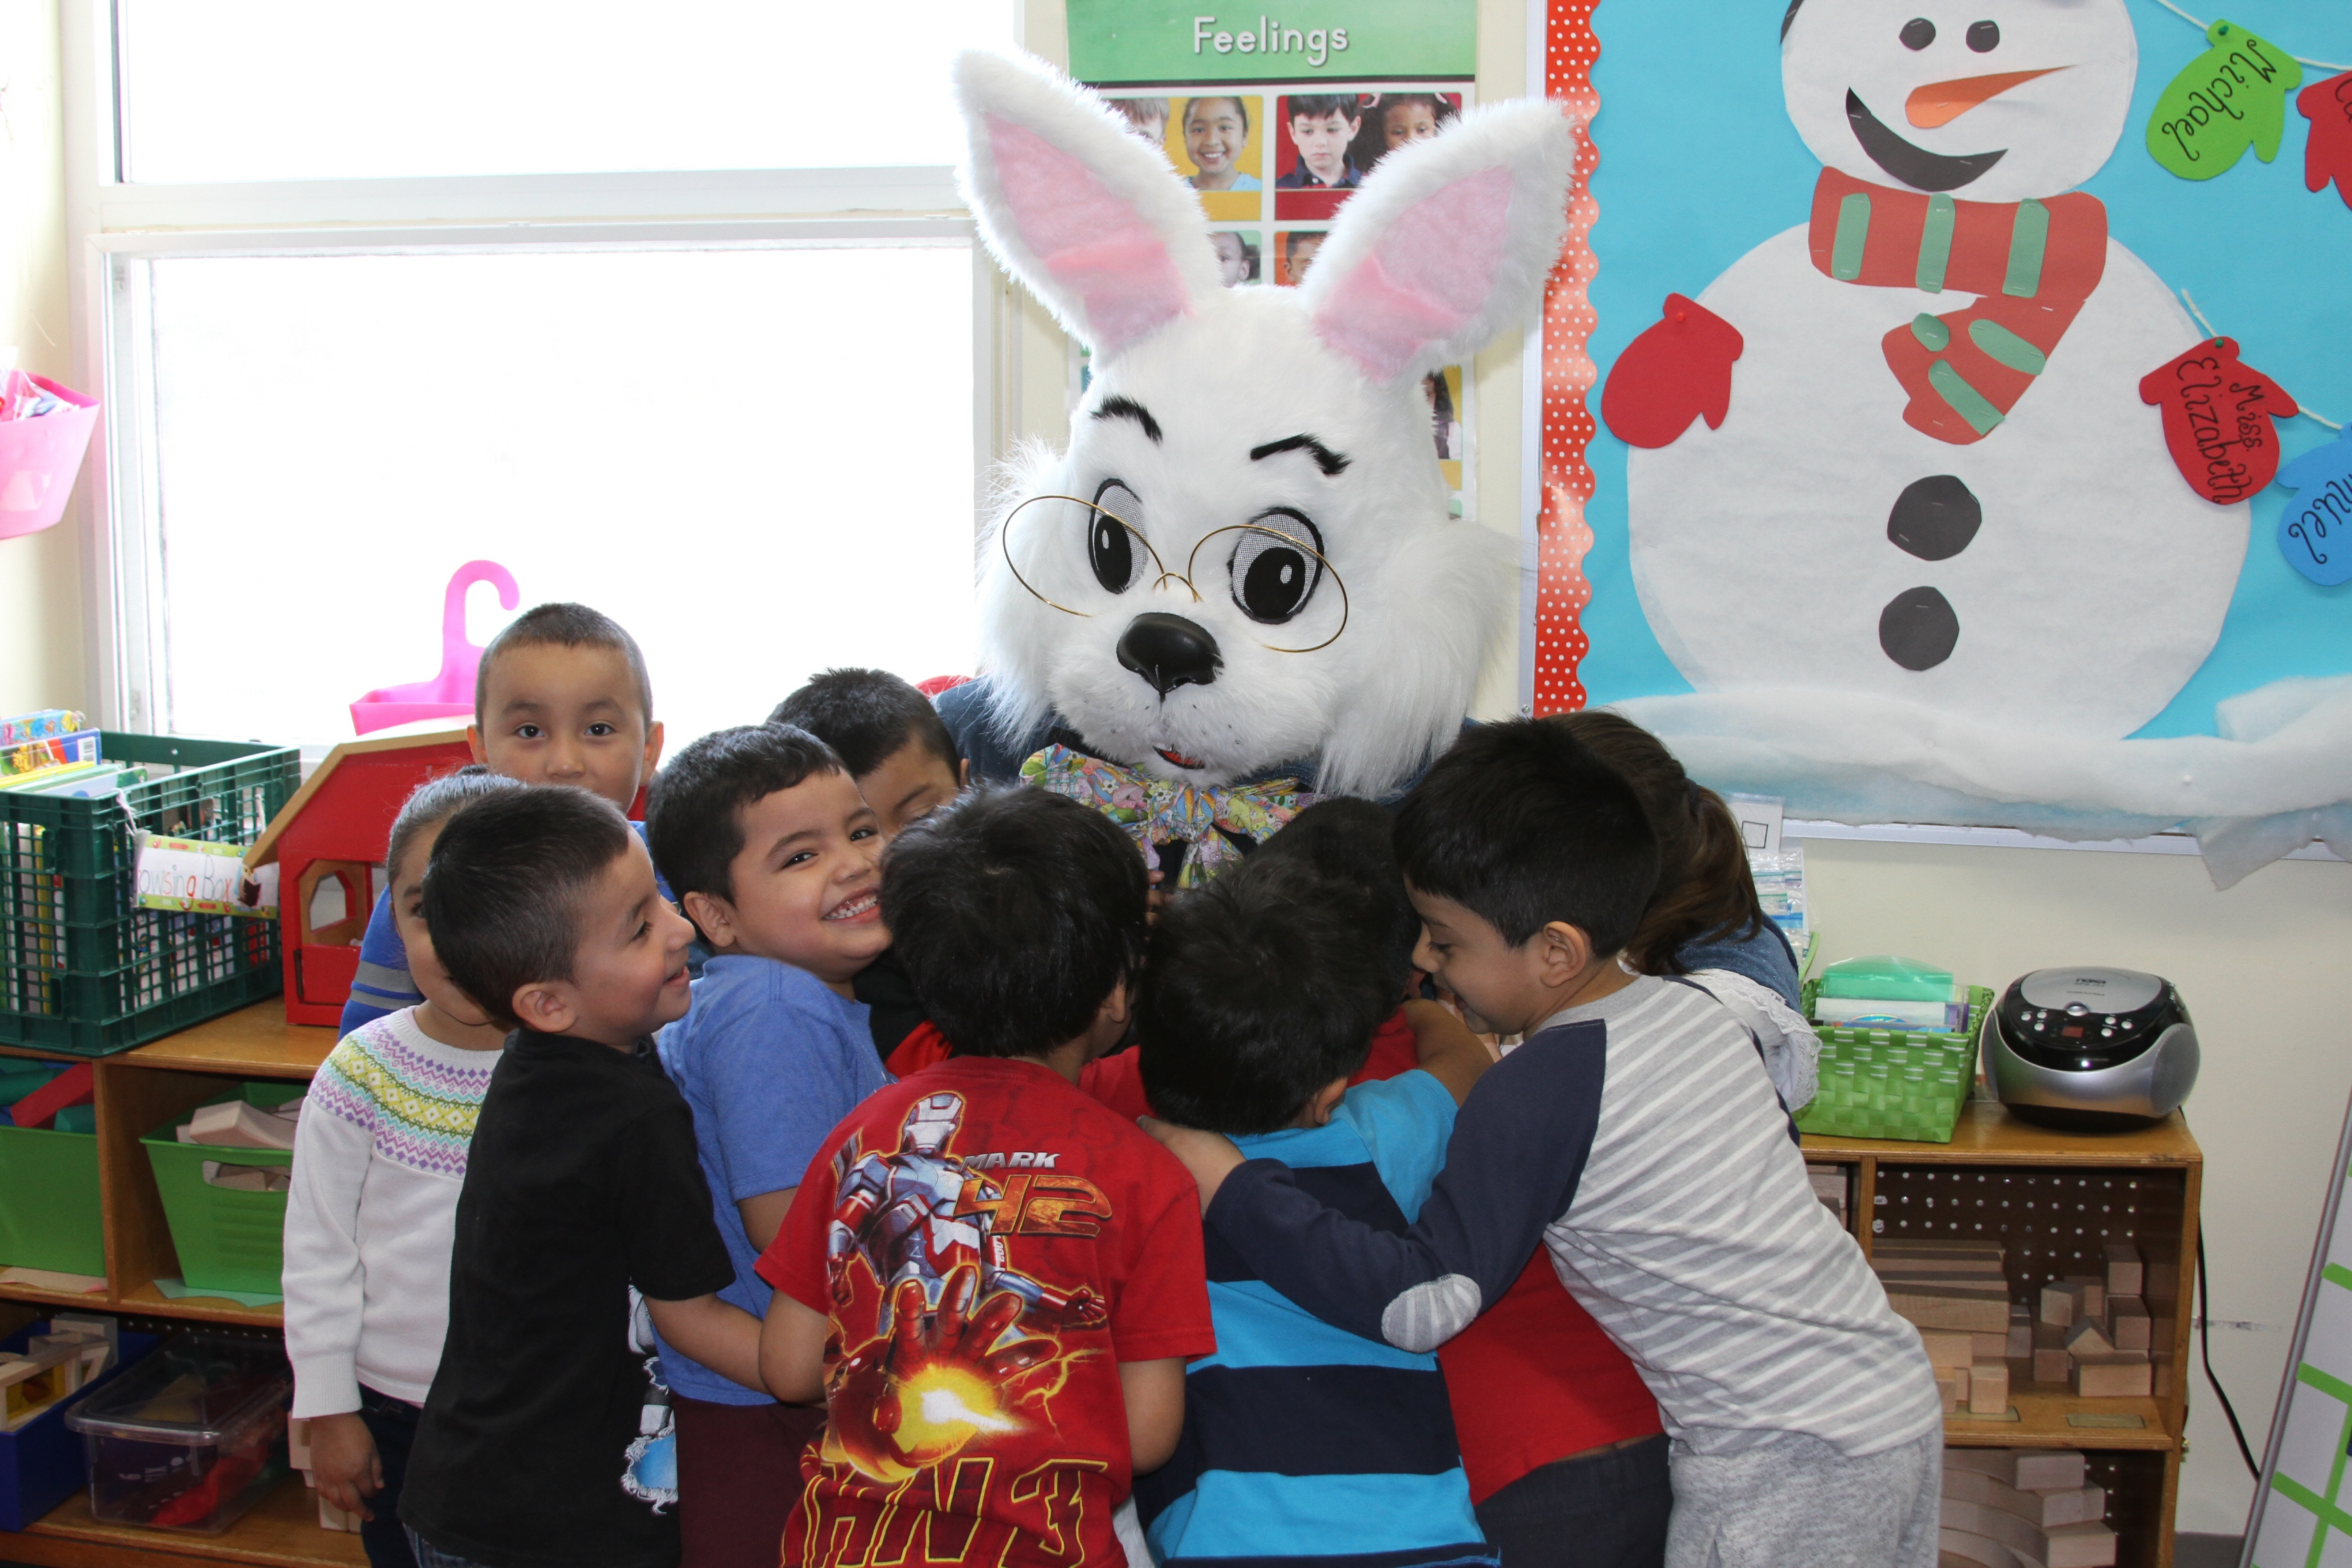 Noerr’s Bunny visits with children in Brewster, N.Y., as part of Noerr’s Bunny Photo Experience. Guests were able make a donation in support of Save the Children’s U.S. Programs, which focus on early education in high-poverty communities and child-focused disaster relief. Phot Credit: Vicky Weynand from The Noerr Programs.